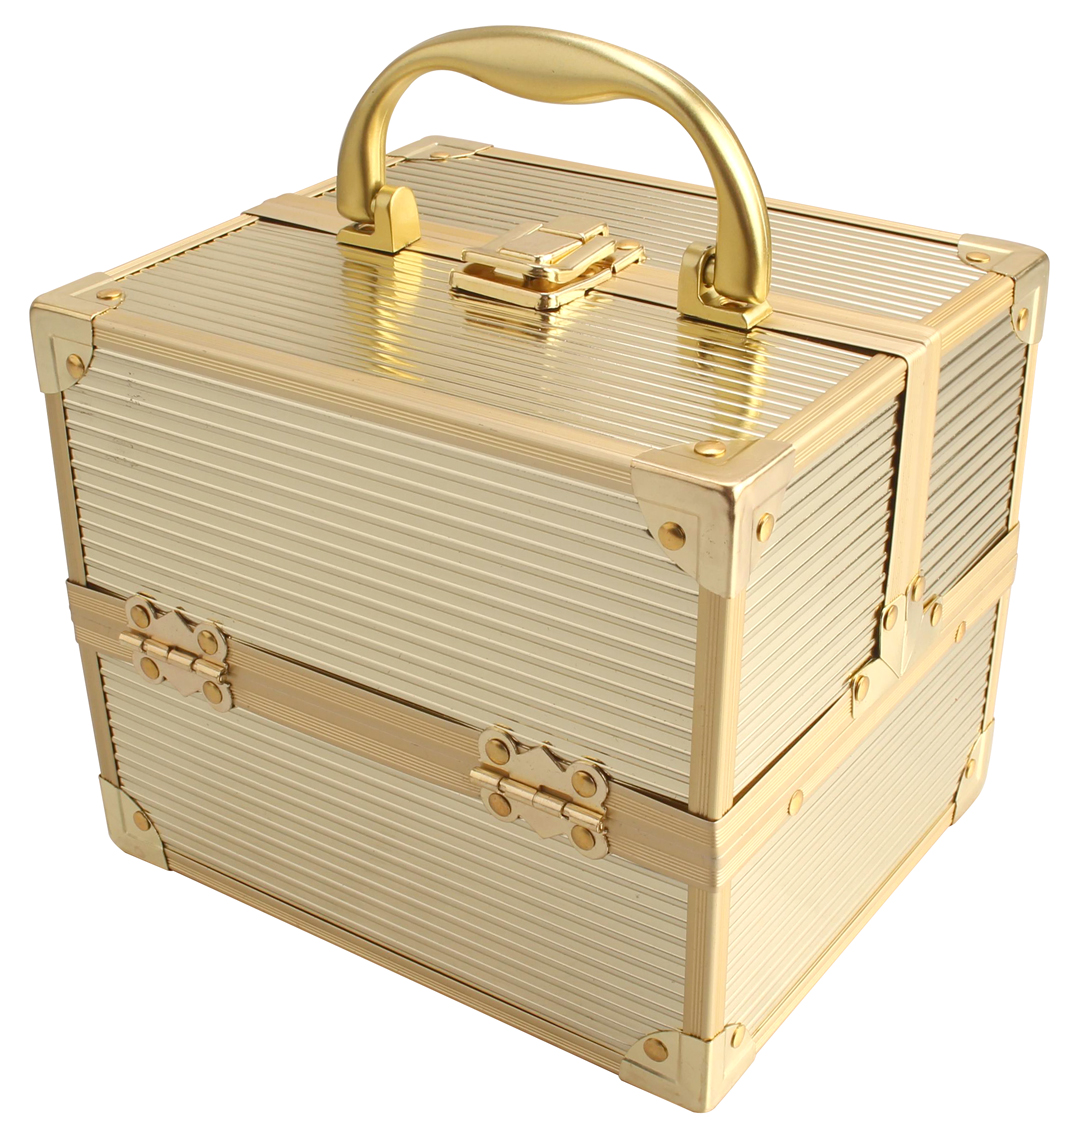 Ab-14 Ggs Compact Makeup Case, Gold Stripe